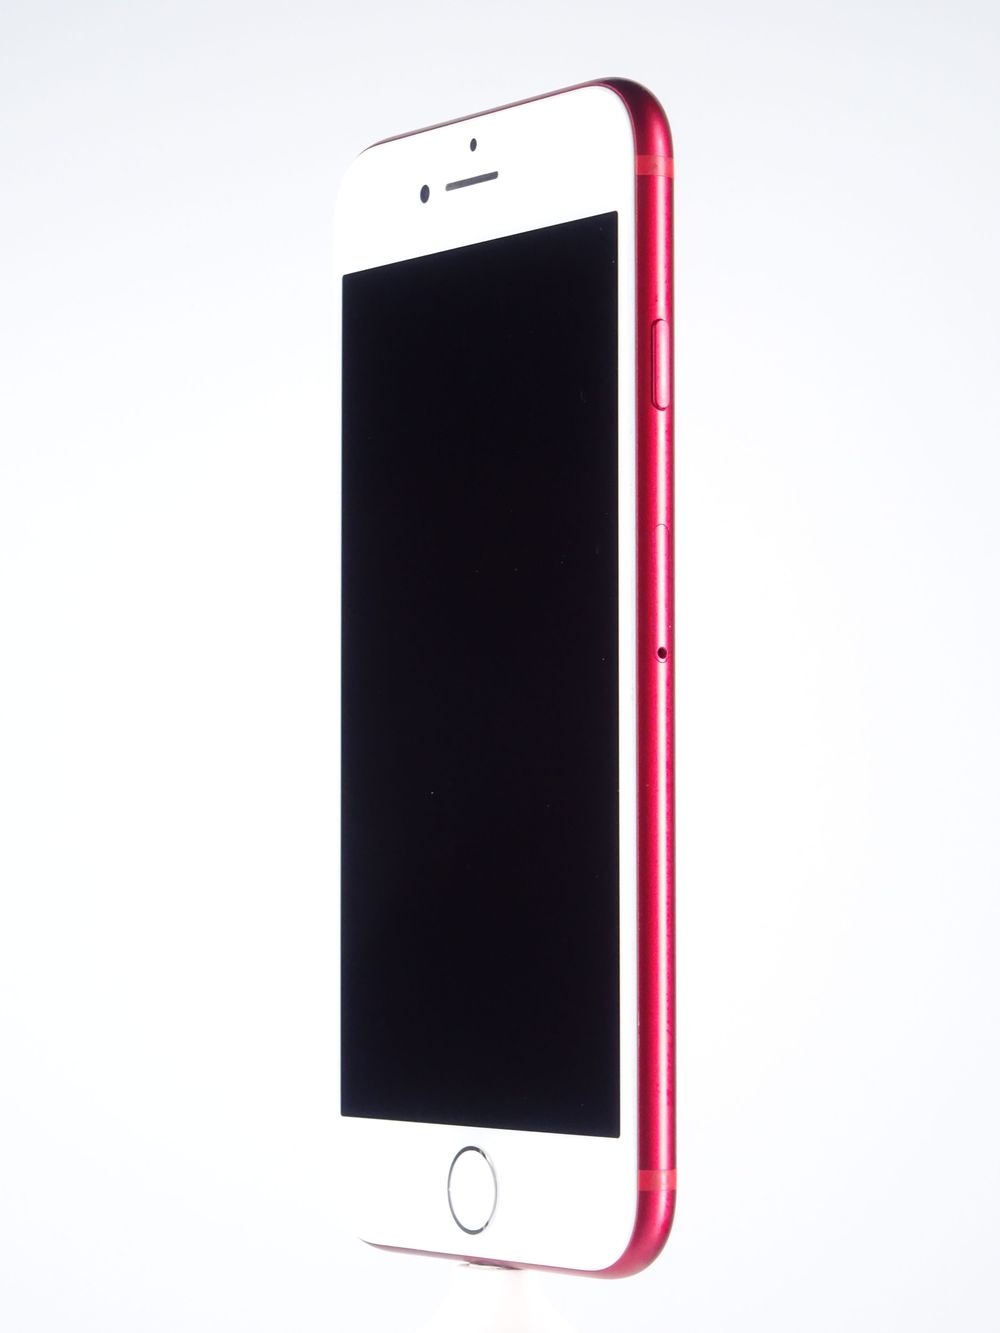 Telefon mobil Apple iPhone 7, Red, 128 GB,  Excelent